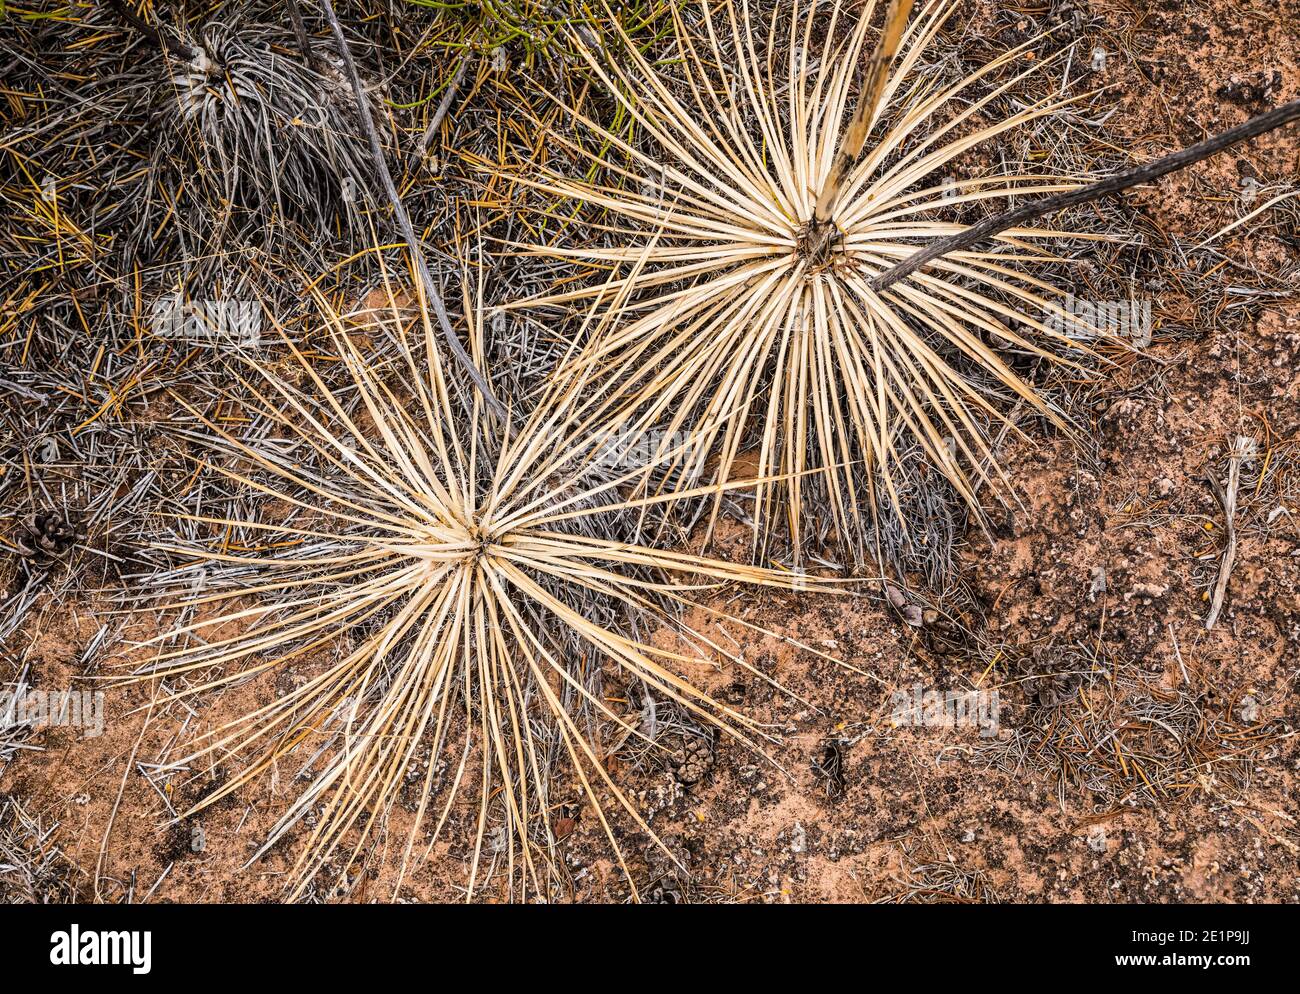 Looking down on yucca plants on the ground. Stock Photo